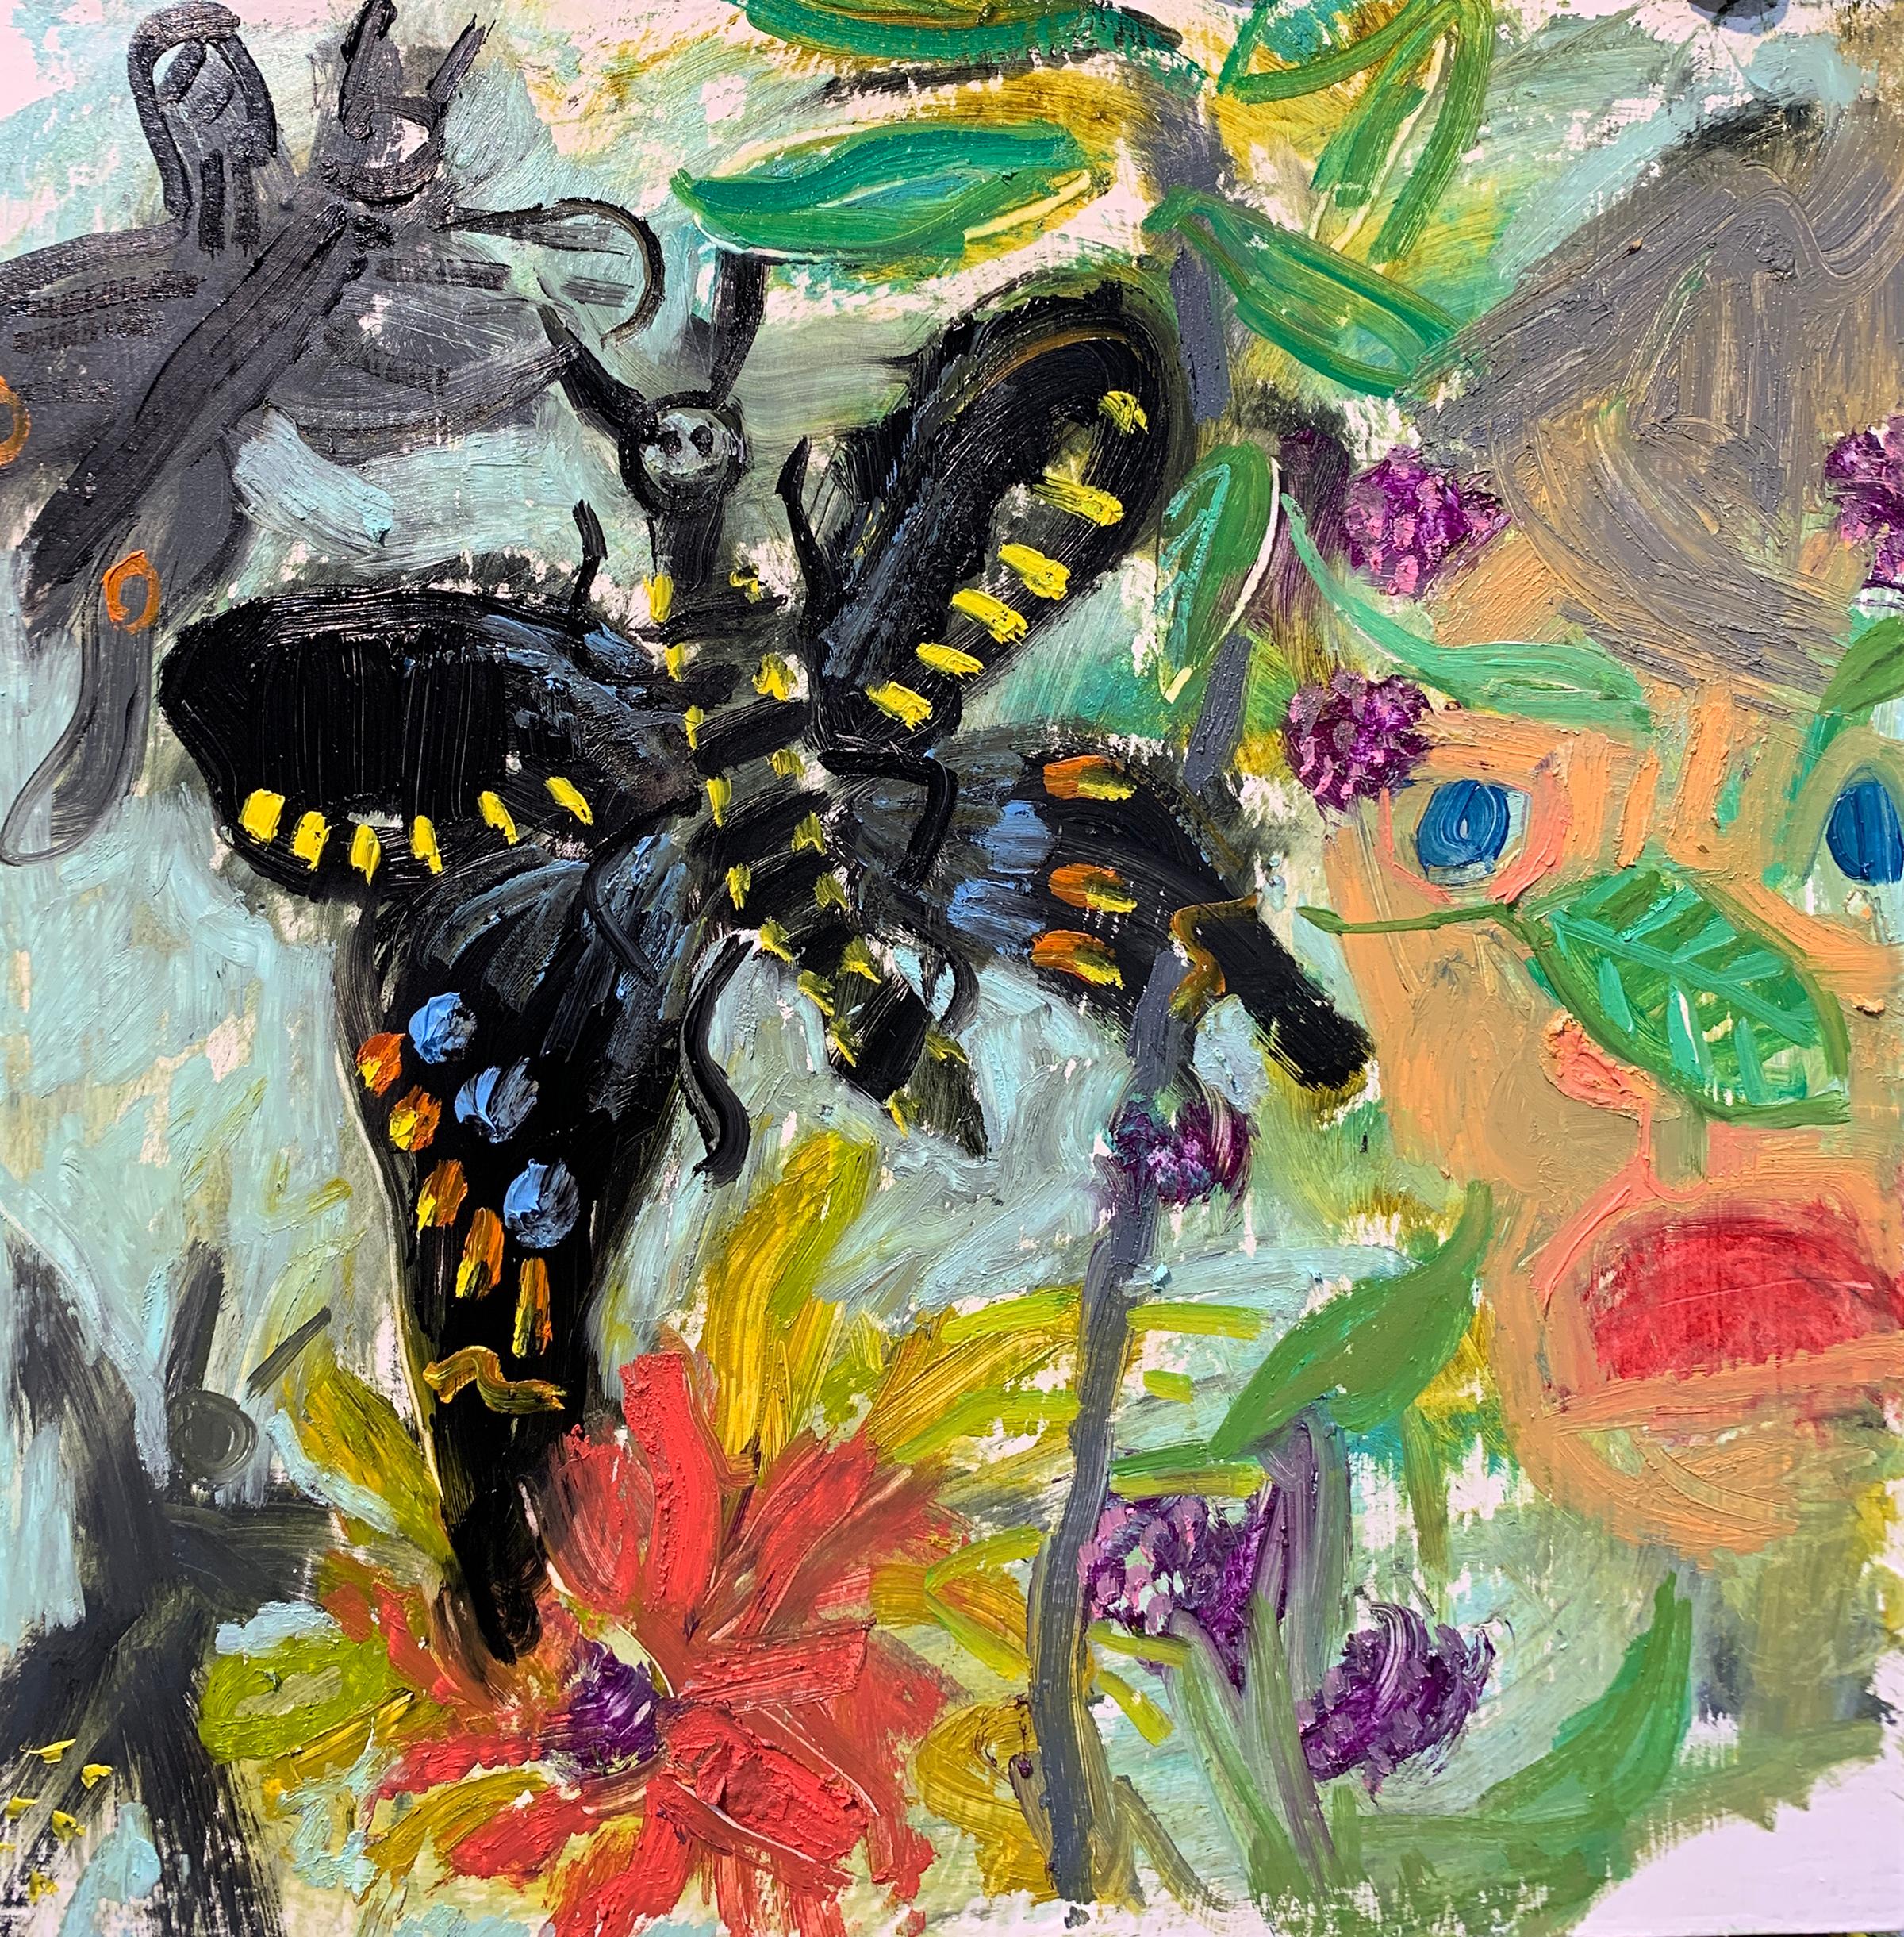 The Friendly Butterfly - Painting by Ashley Norwood Cooper